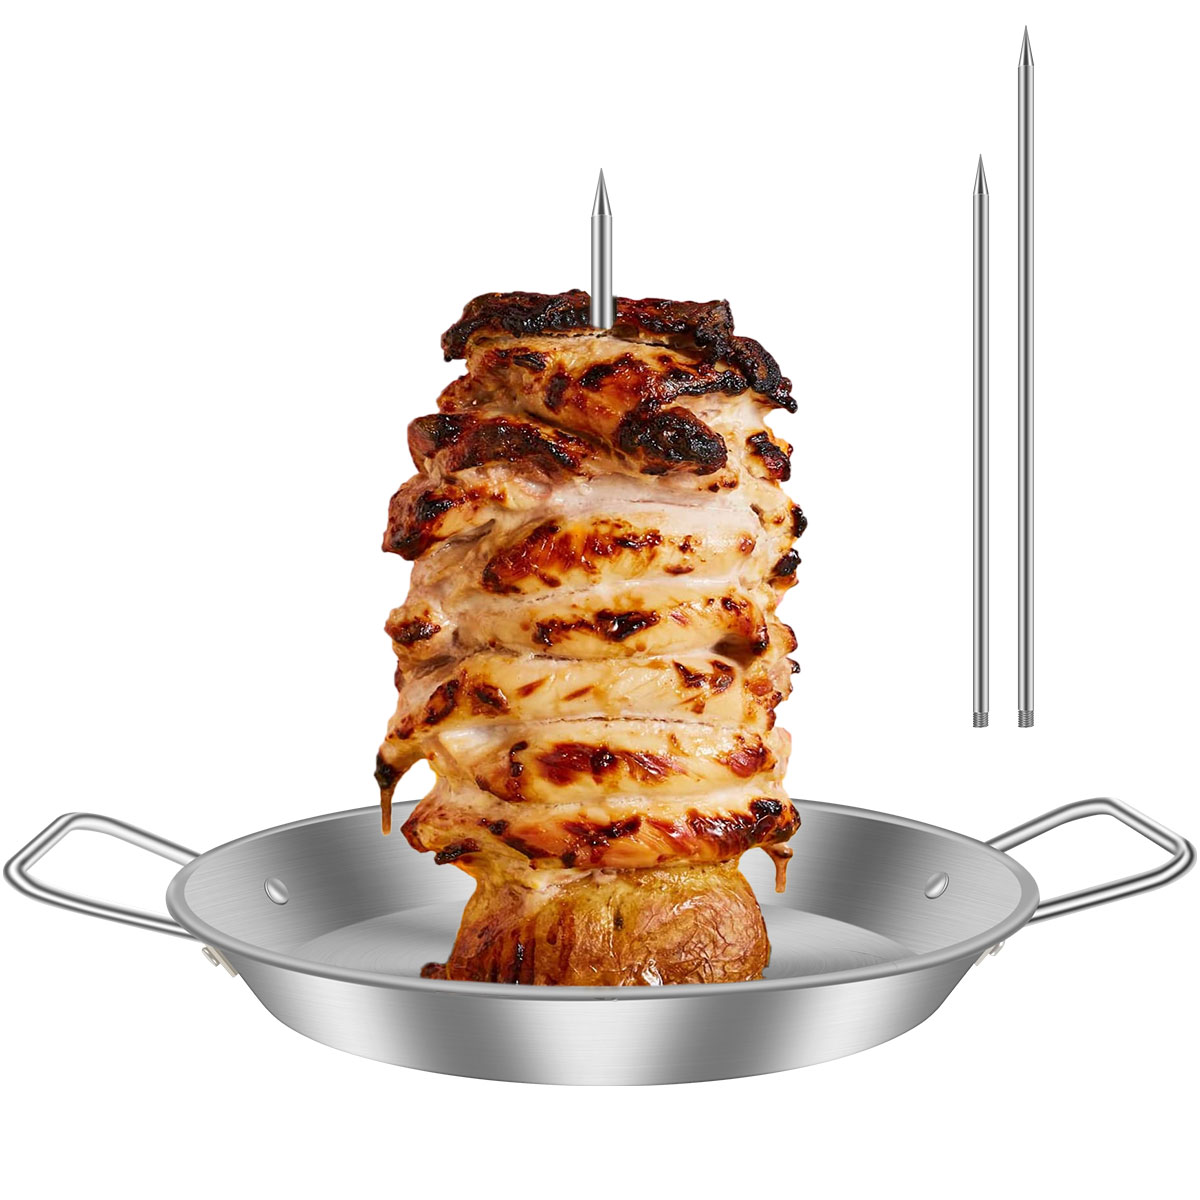 Fyeme Vertical Meat Skewer Stainless Steel BBQ Vertical Skewer Grill with 3 Replacement Spikes Barbecue Vertical Skewer Grill Rack Stand with Handle for Whole Chicken Fish Sausage Steak - image 1 of 11